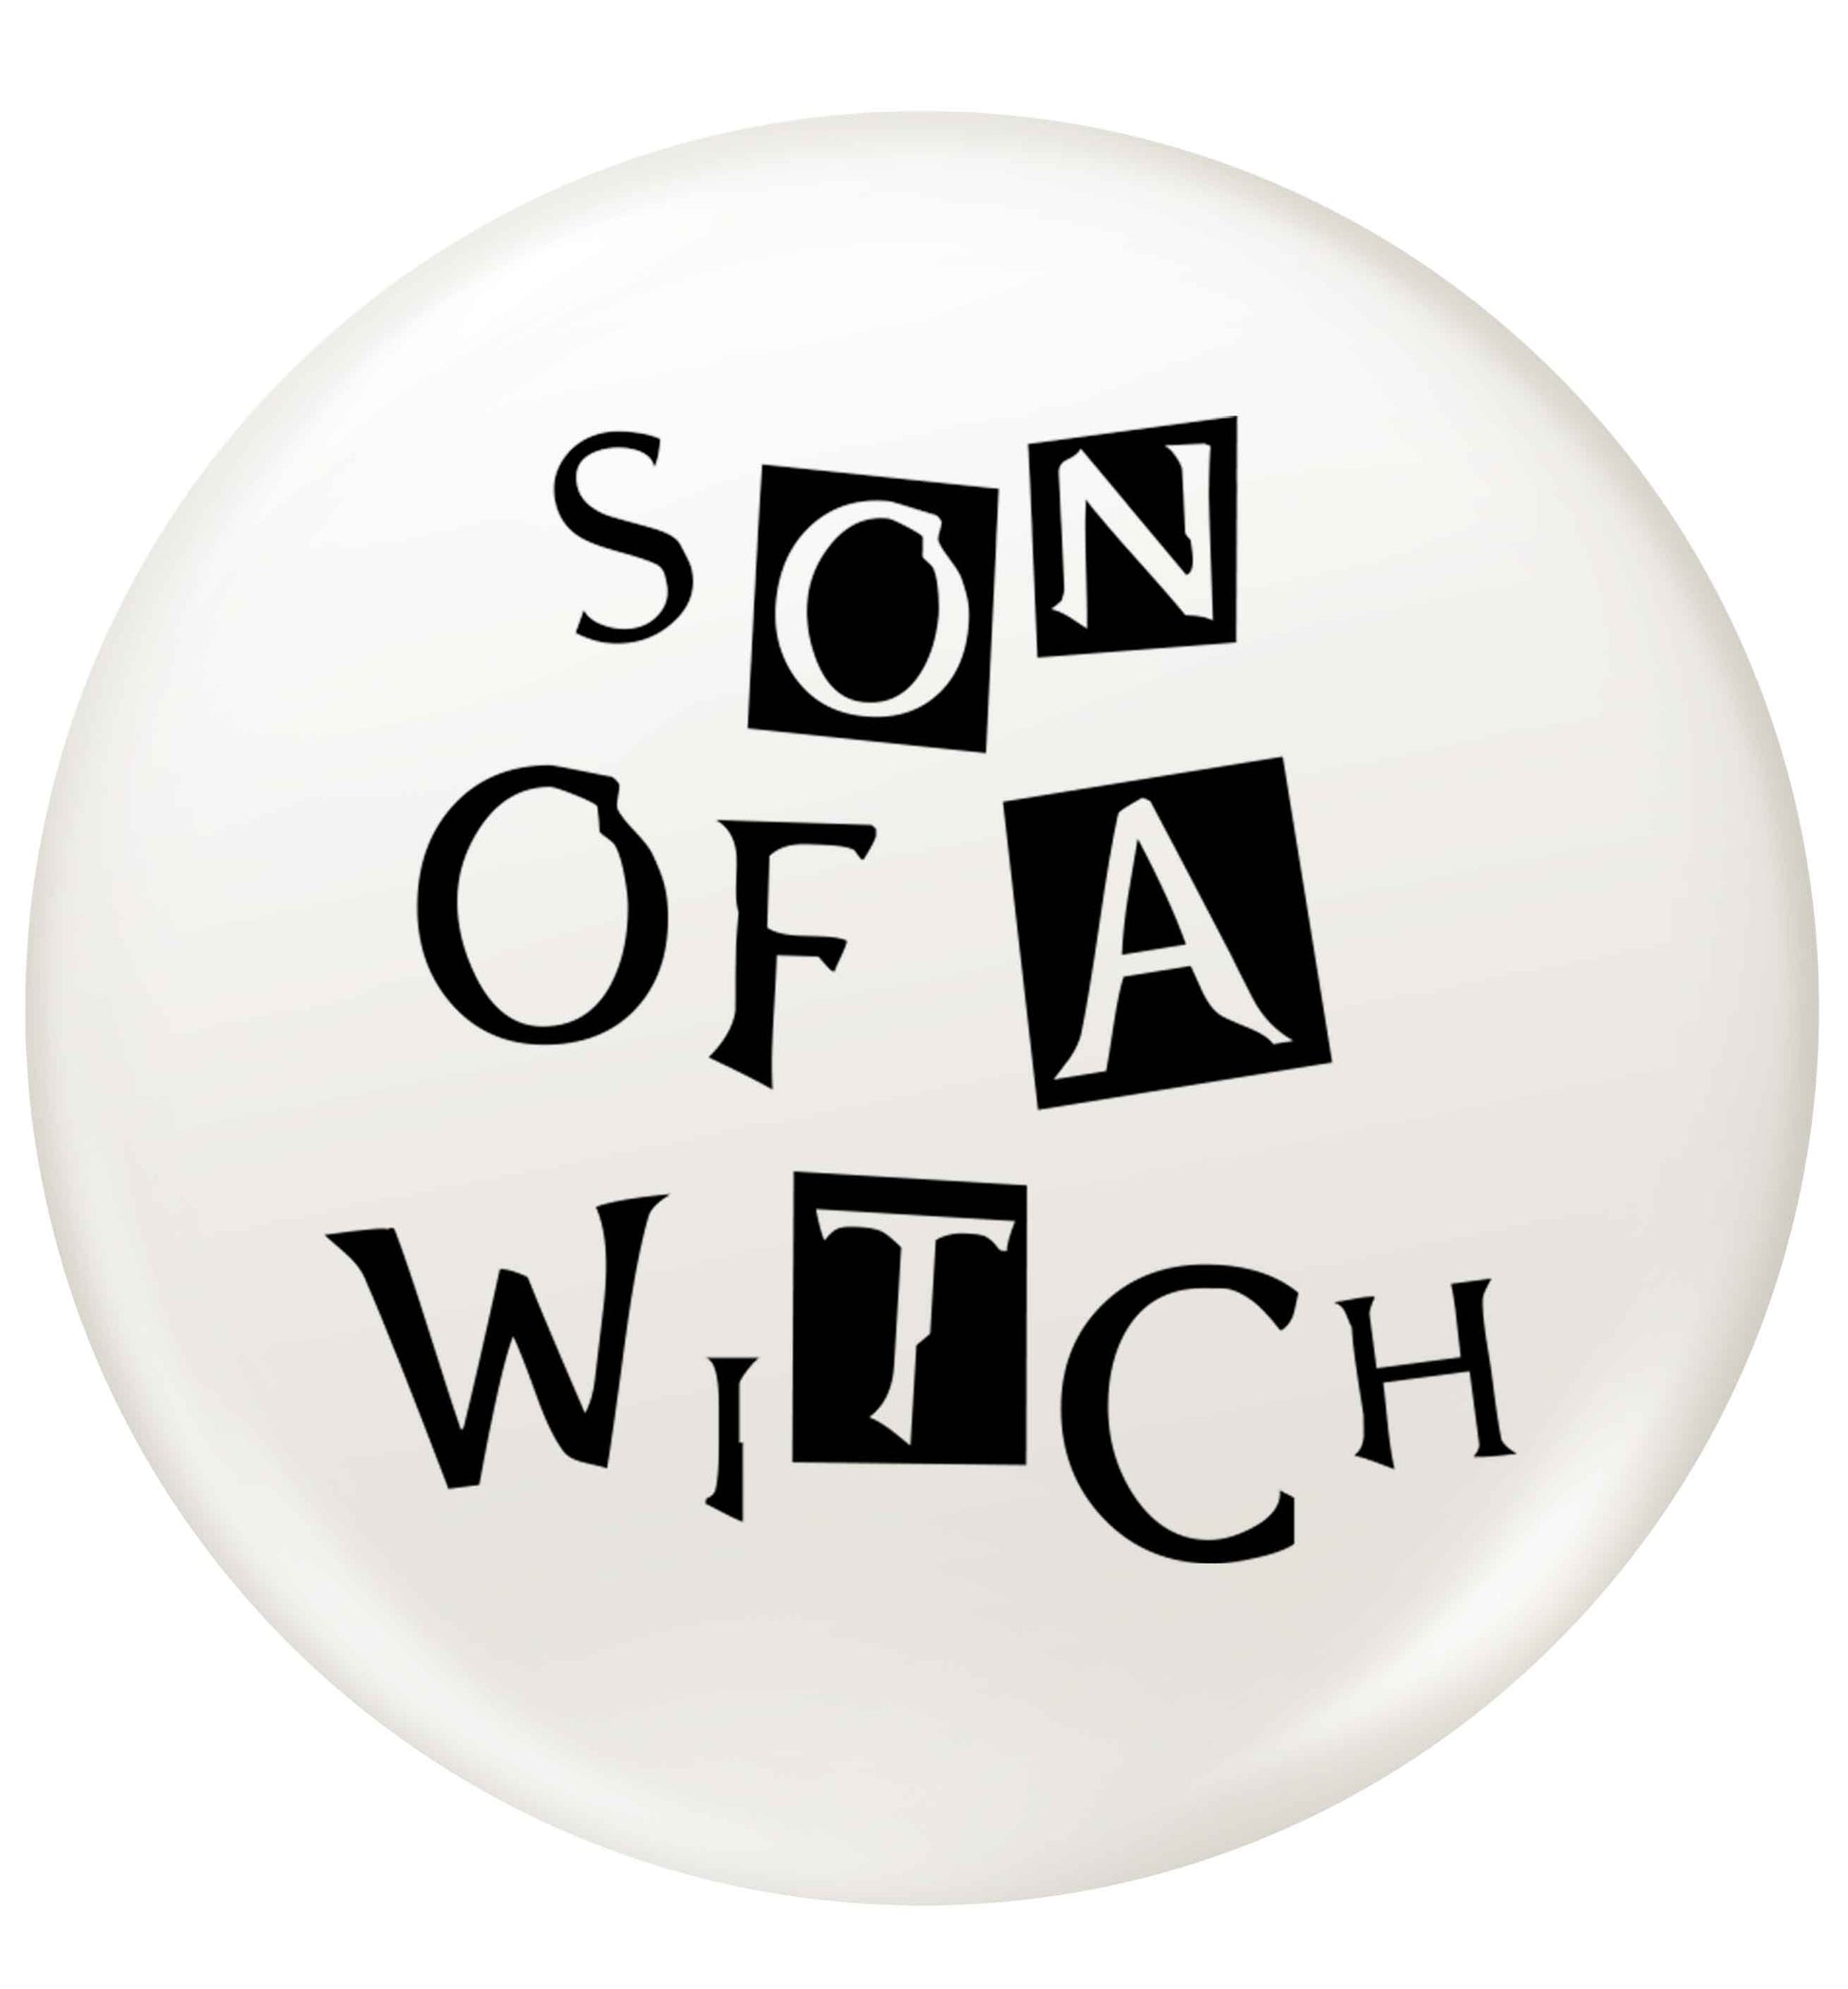 Son of a witch small 25mm Pin badge